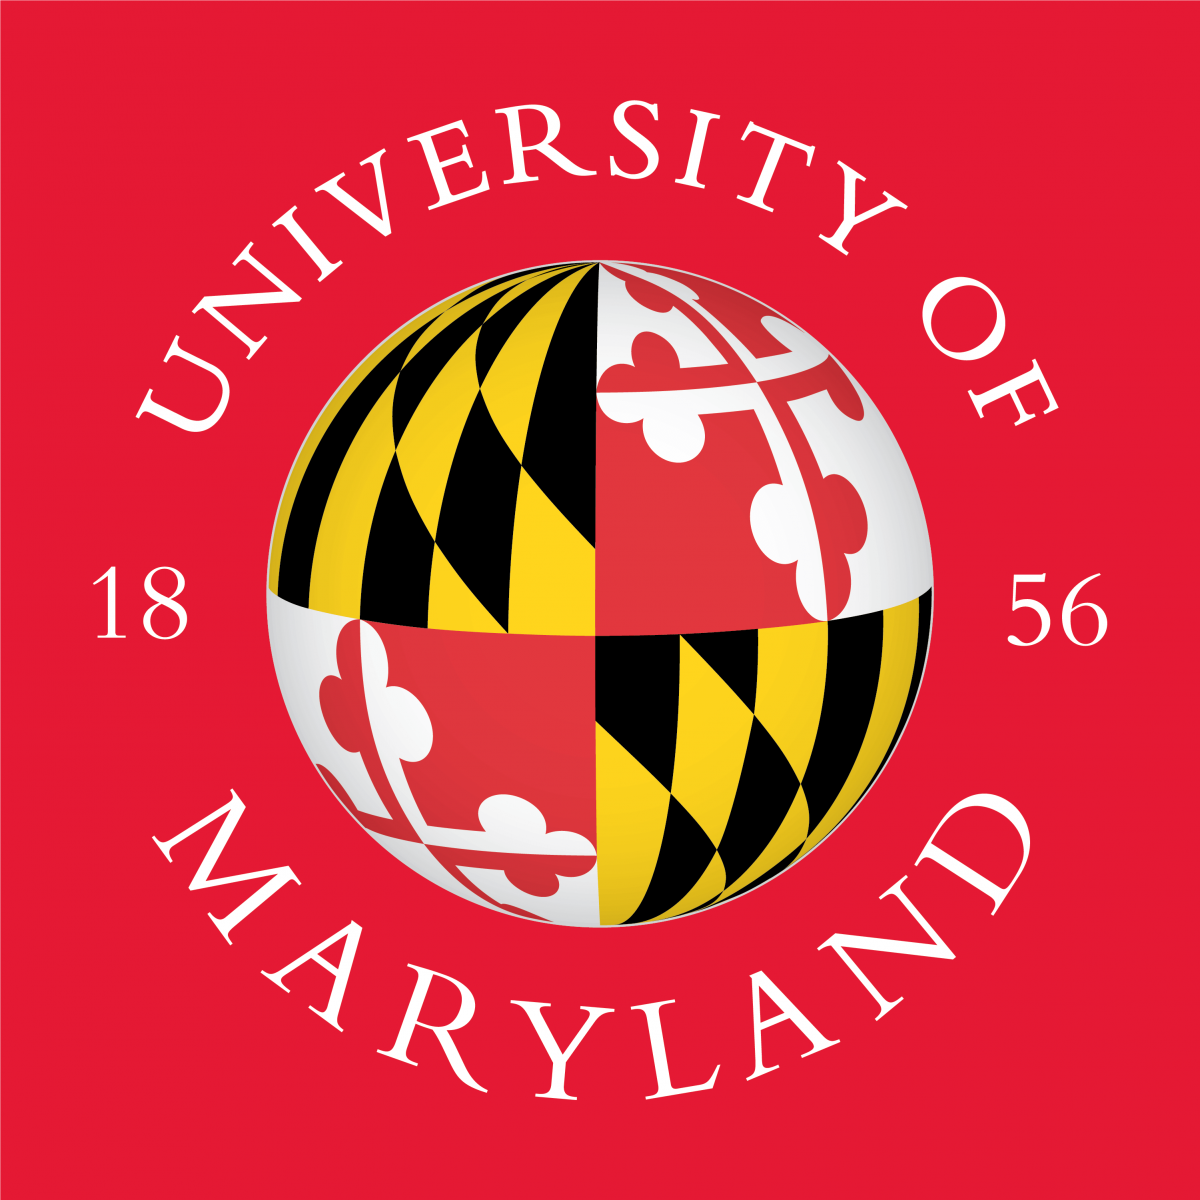 The University of Maryland A Preeminent Public Research University